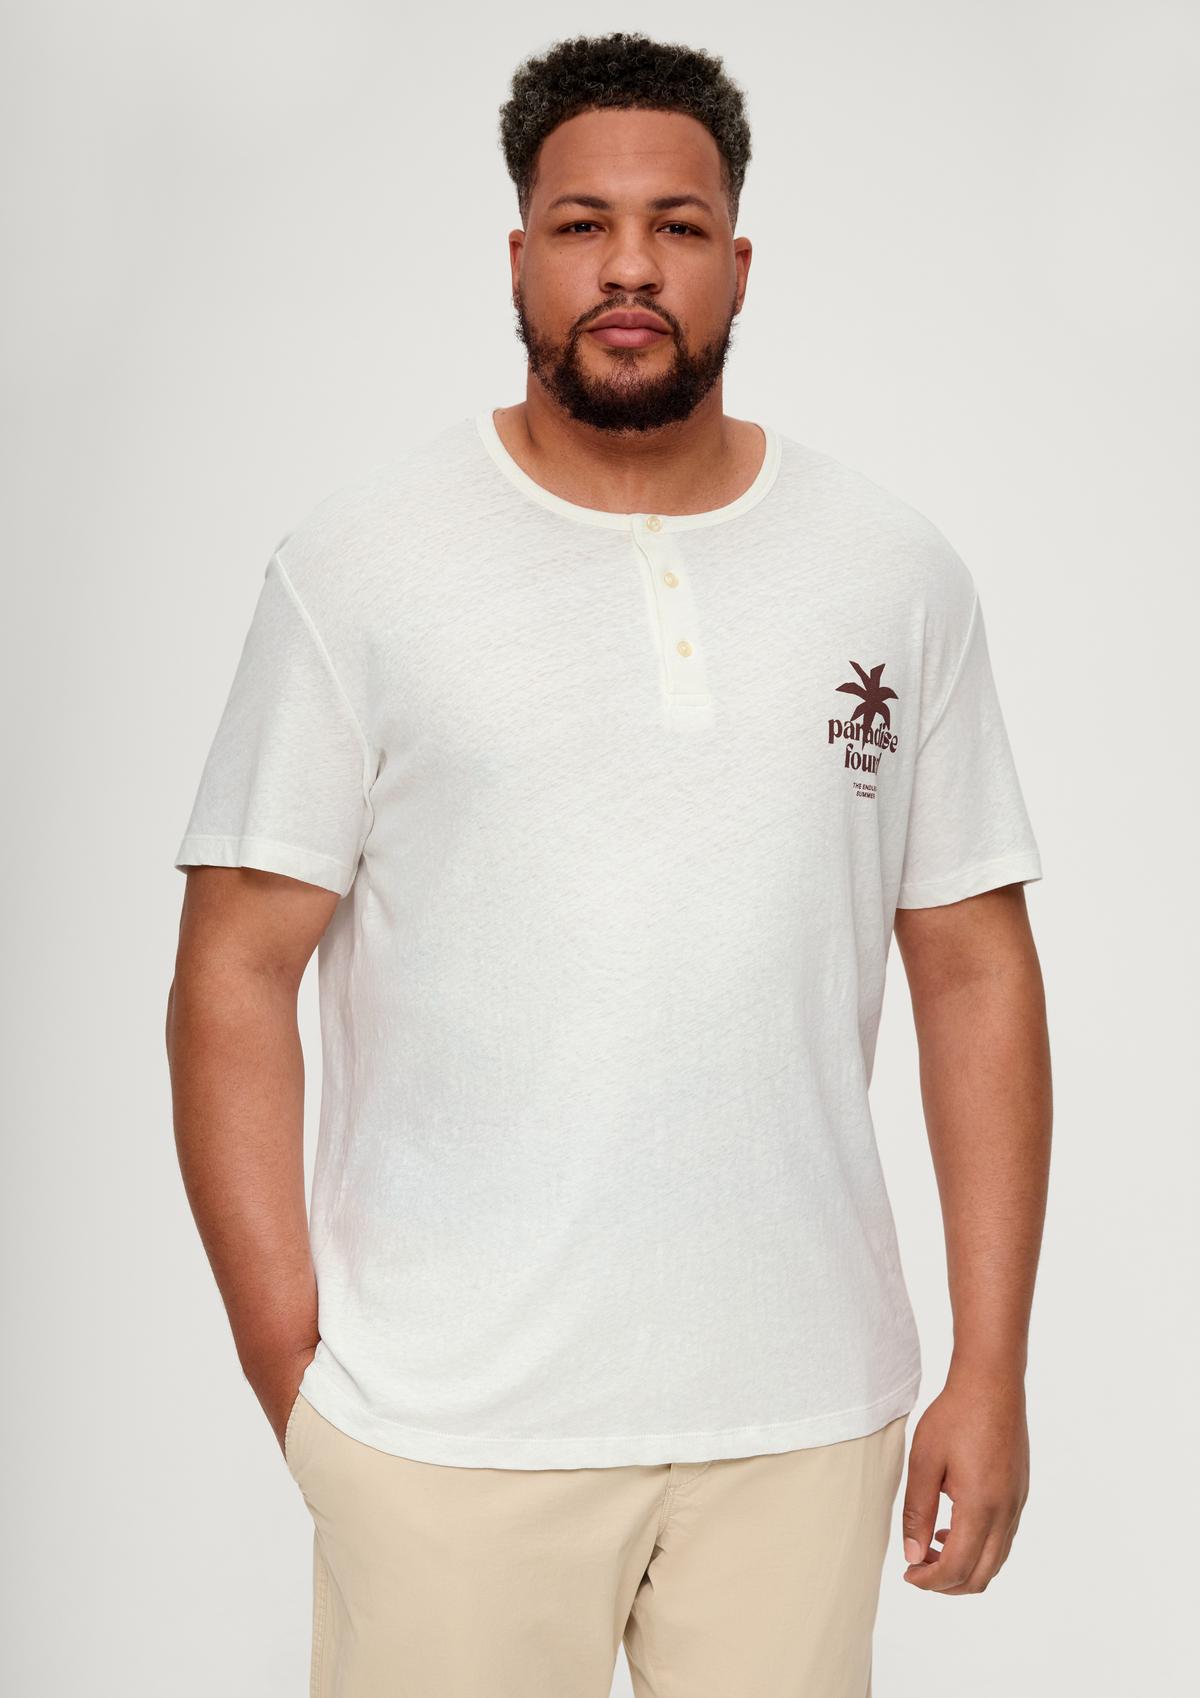 s.Oliver T-shirt made of cotton and hemp